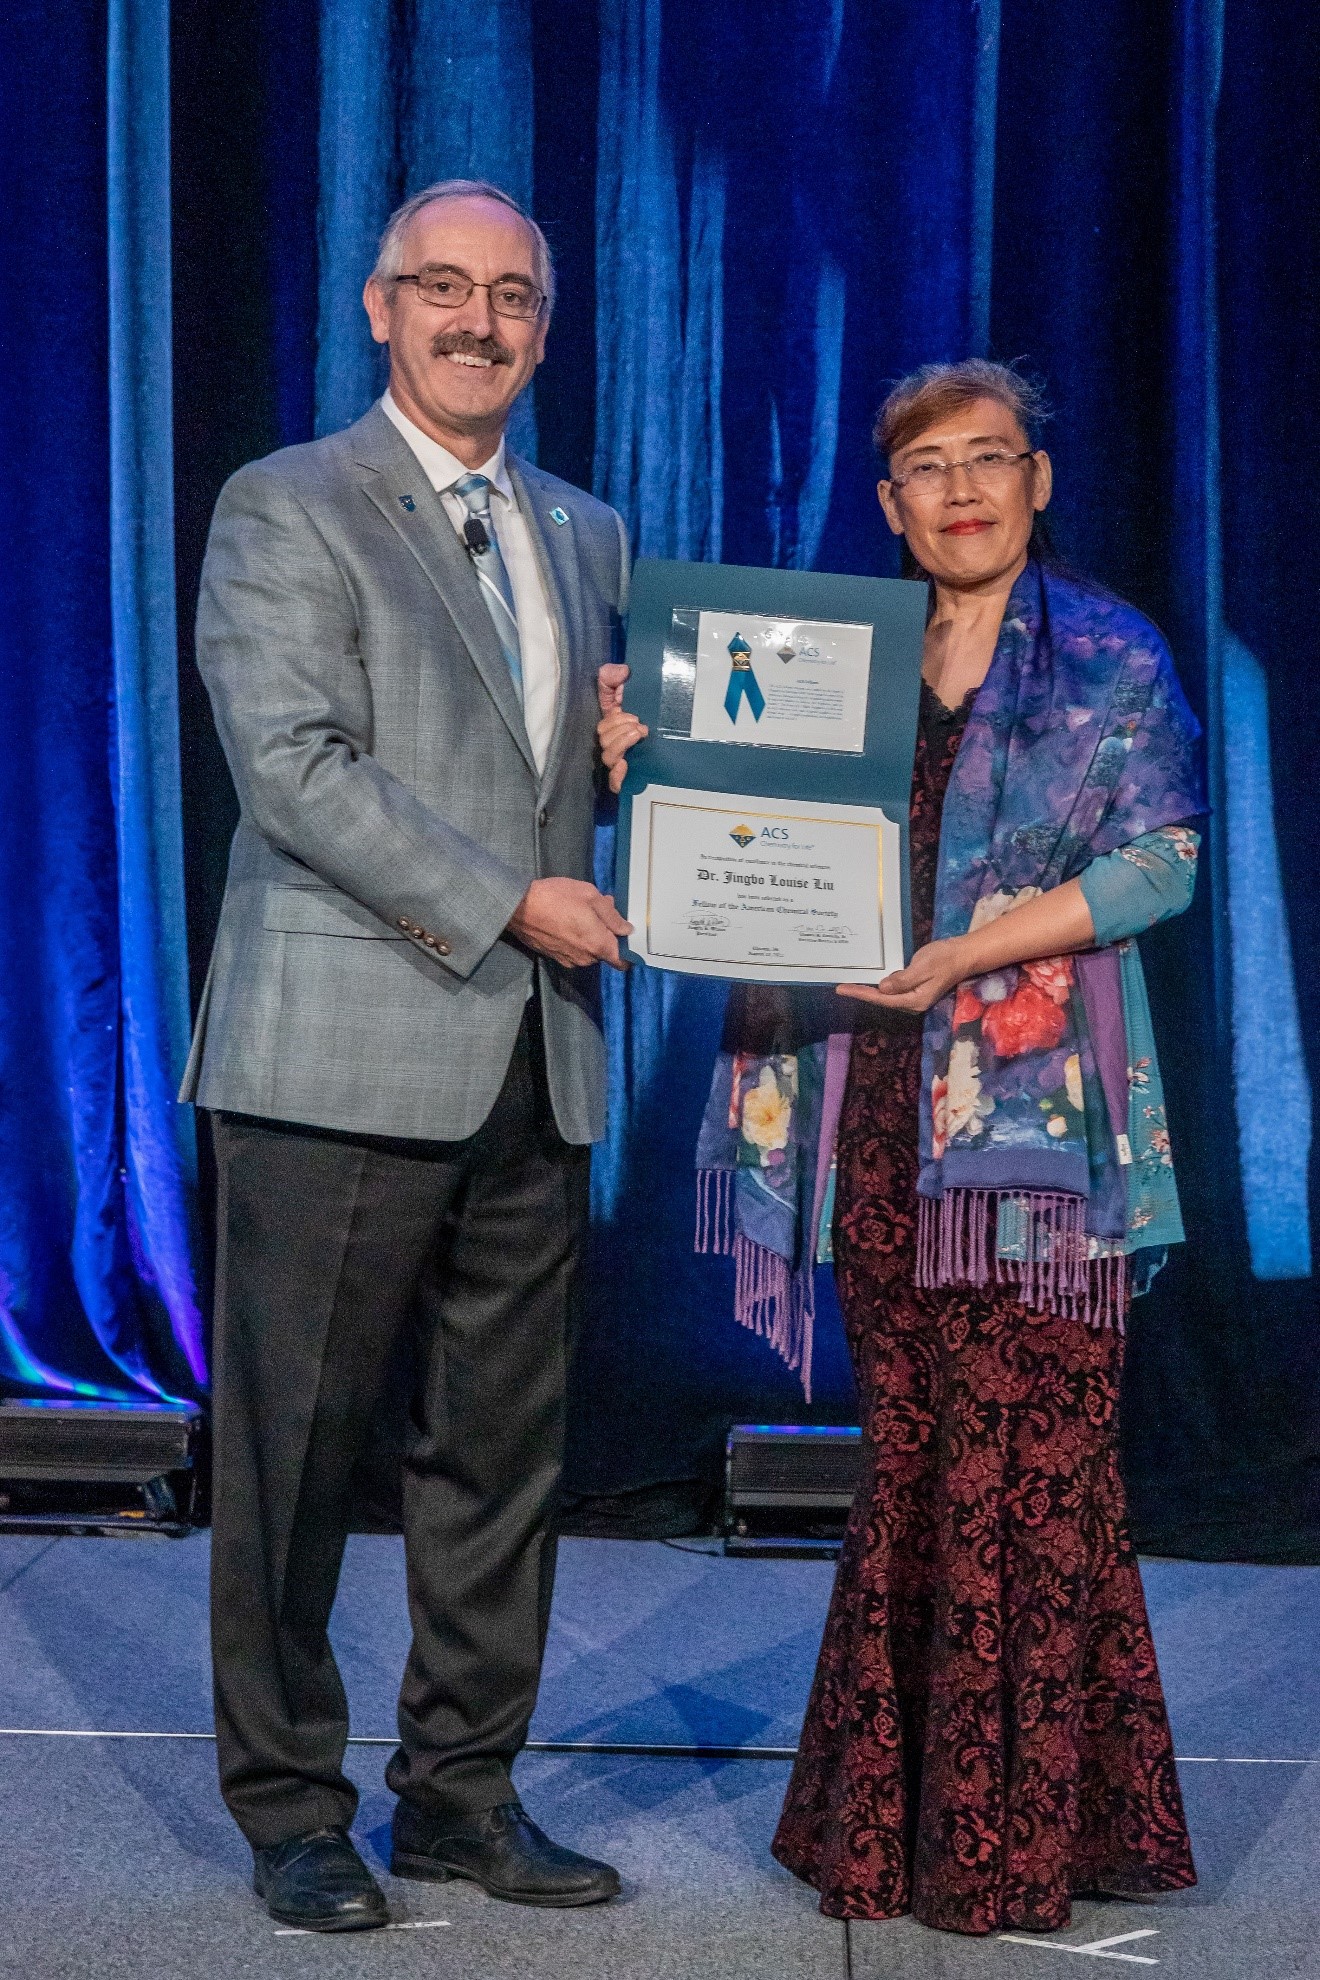 Dr. Jingbo Louise Liu, right, is presented her award by Dr. Wayne E. Jones Jr., Director at Large from the Board of Directors of the American Chemical Society.